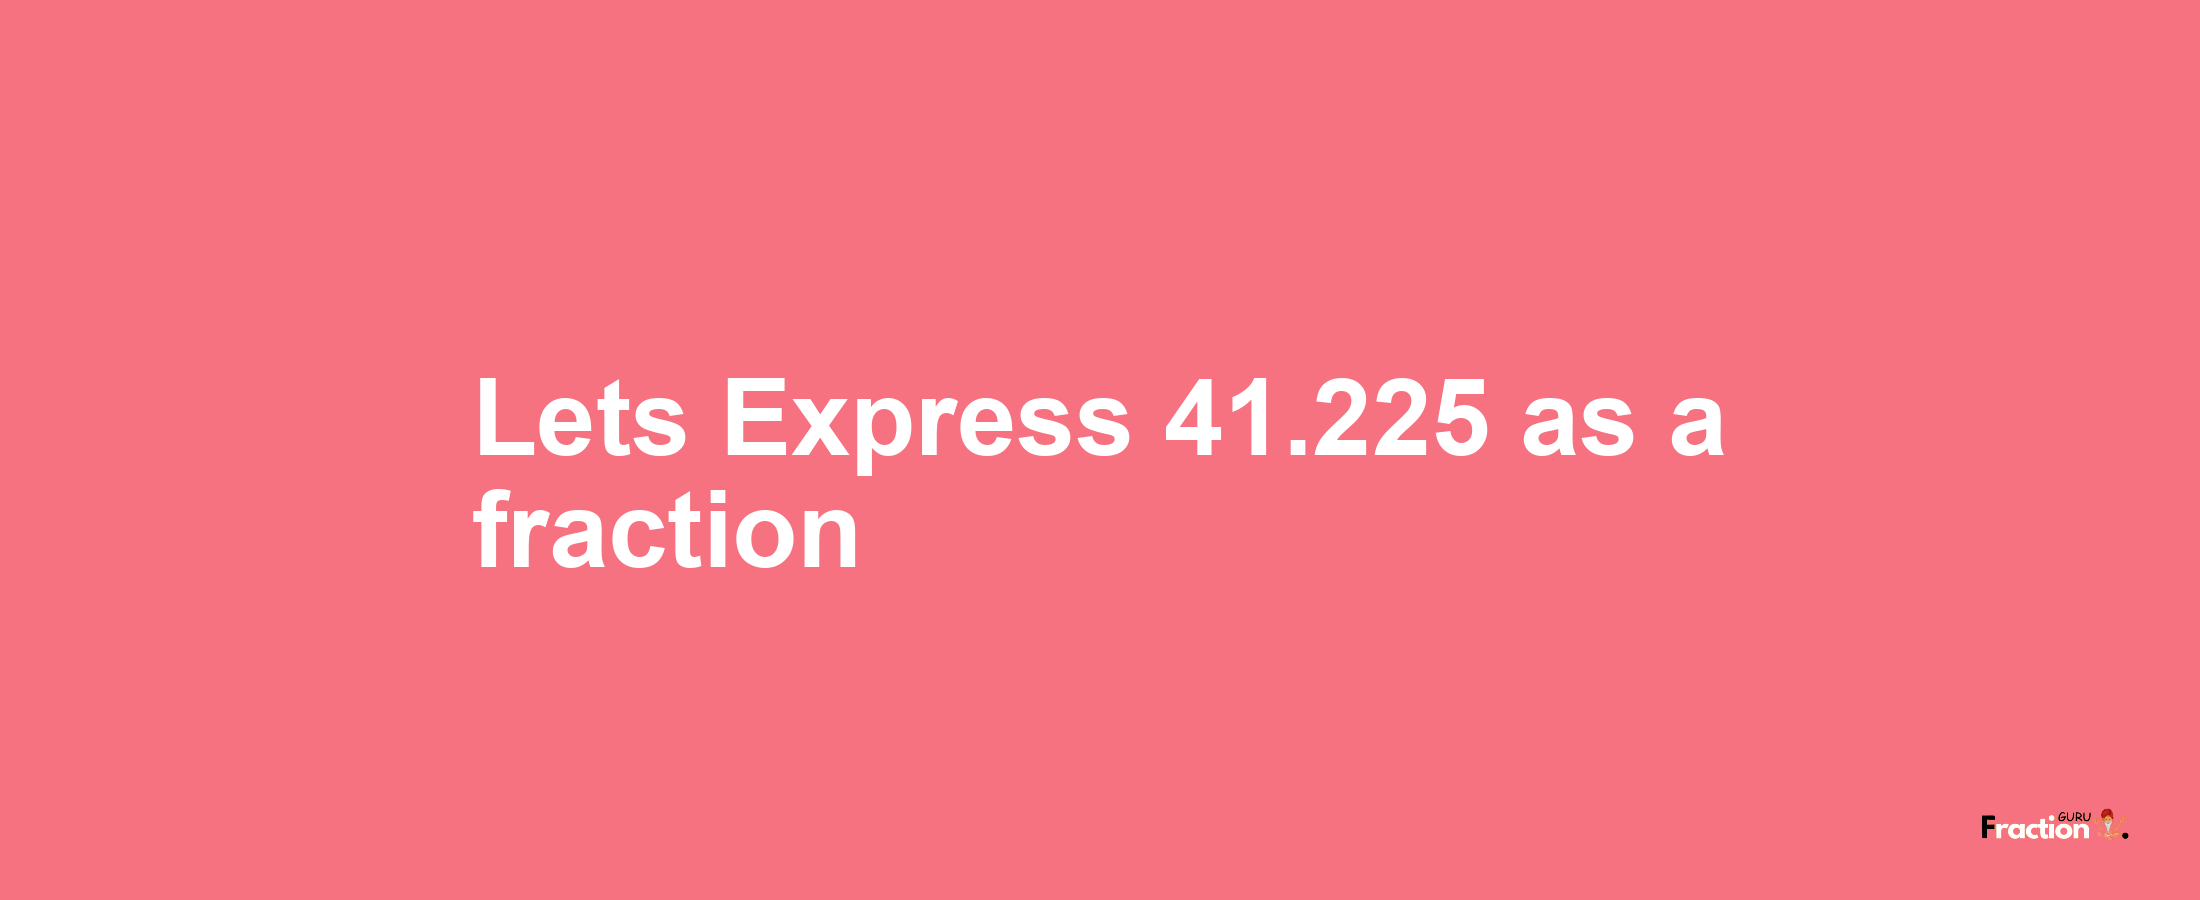 Lets Express 41.225 as afraction